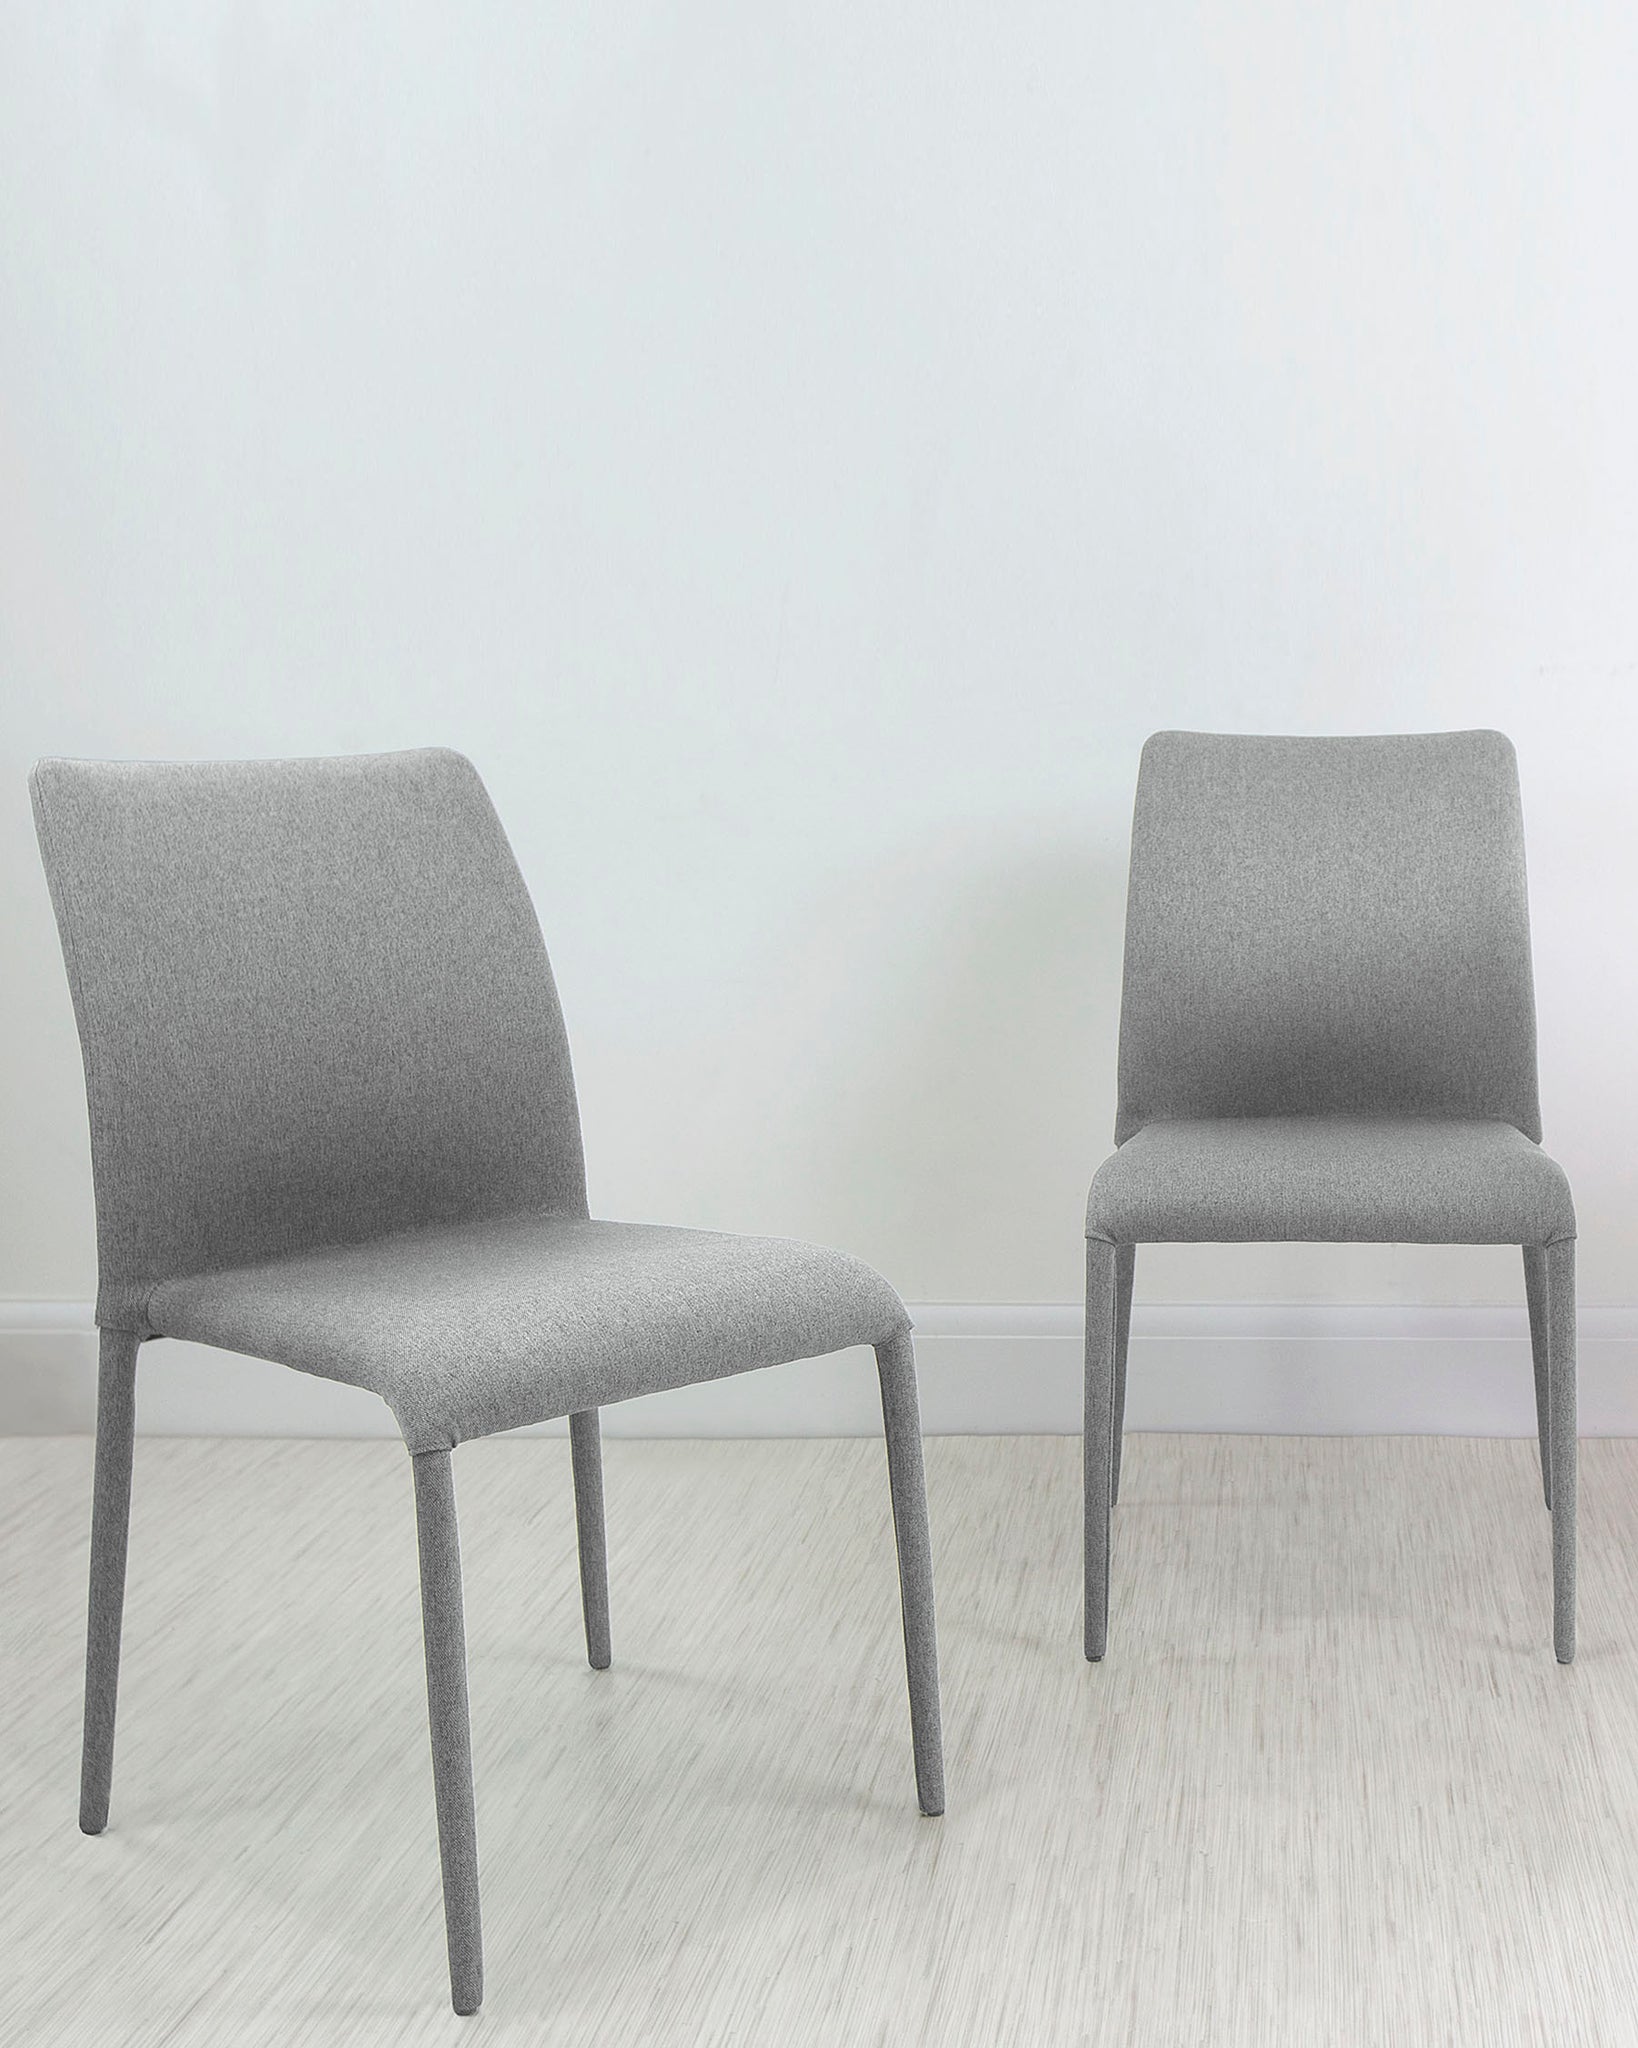 Fabric Dining Chairs | Danetti